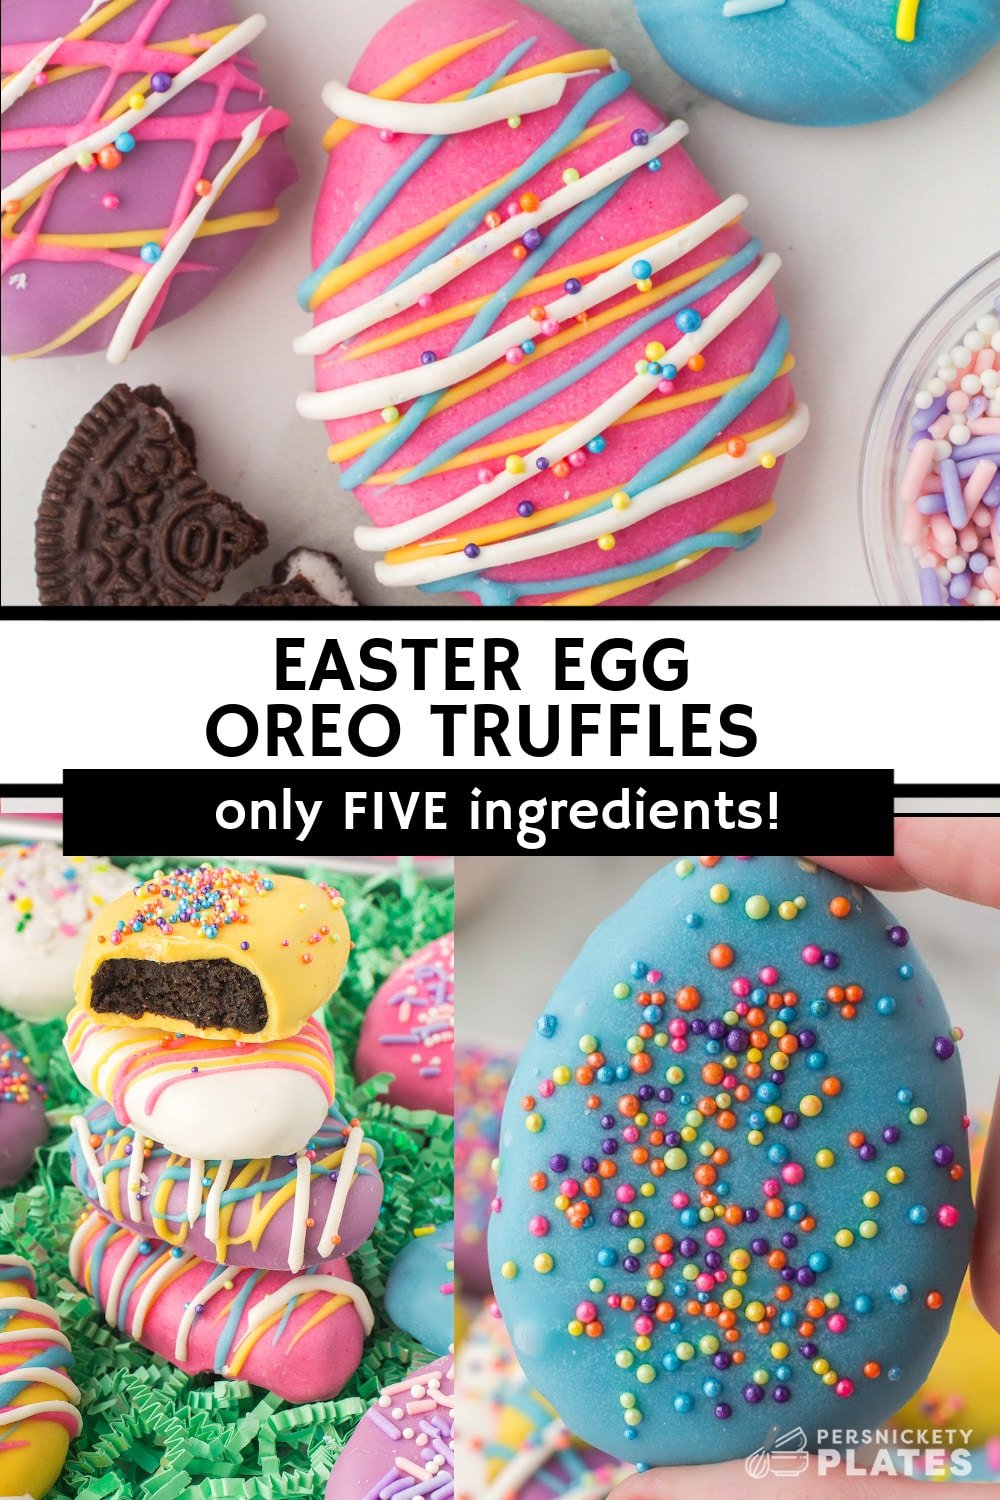 Easter Egg Oreo Truffles are no-bake, made with just five ingredients, fun for kids to decorate, and the perfect addition to an Easter sweets table. | www.persnicketyplates.com